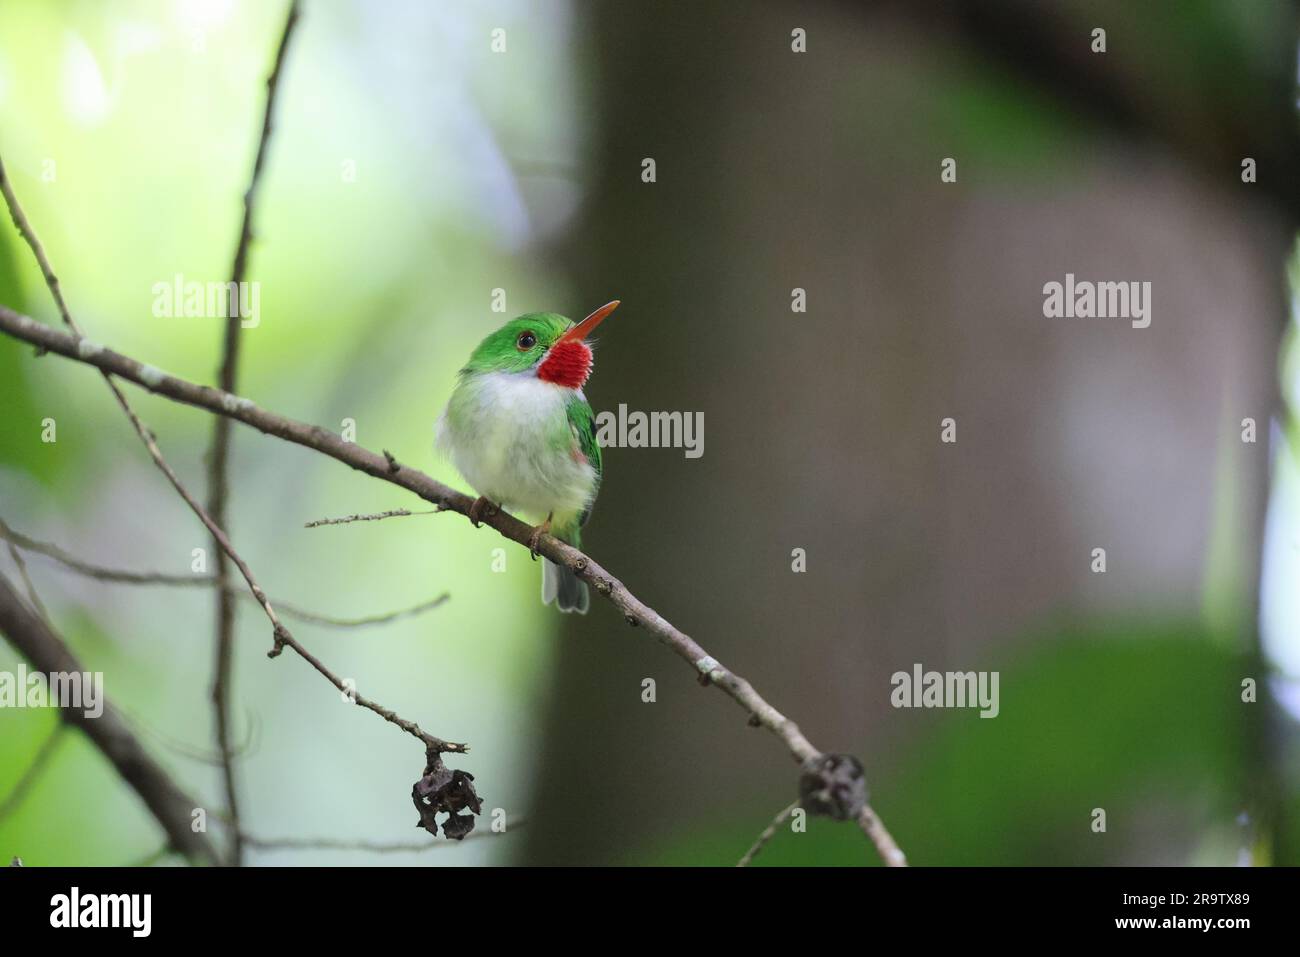 Jamaican tody (Todus todus), one of the smallest birds in the world Stock Photo